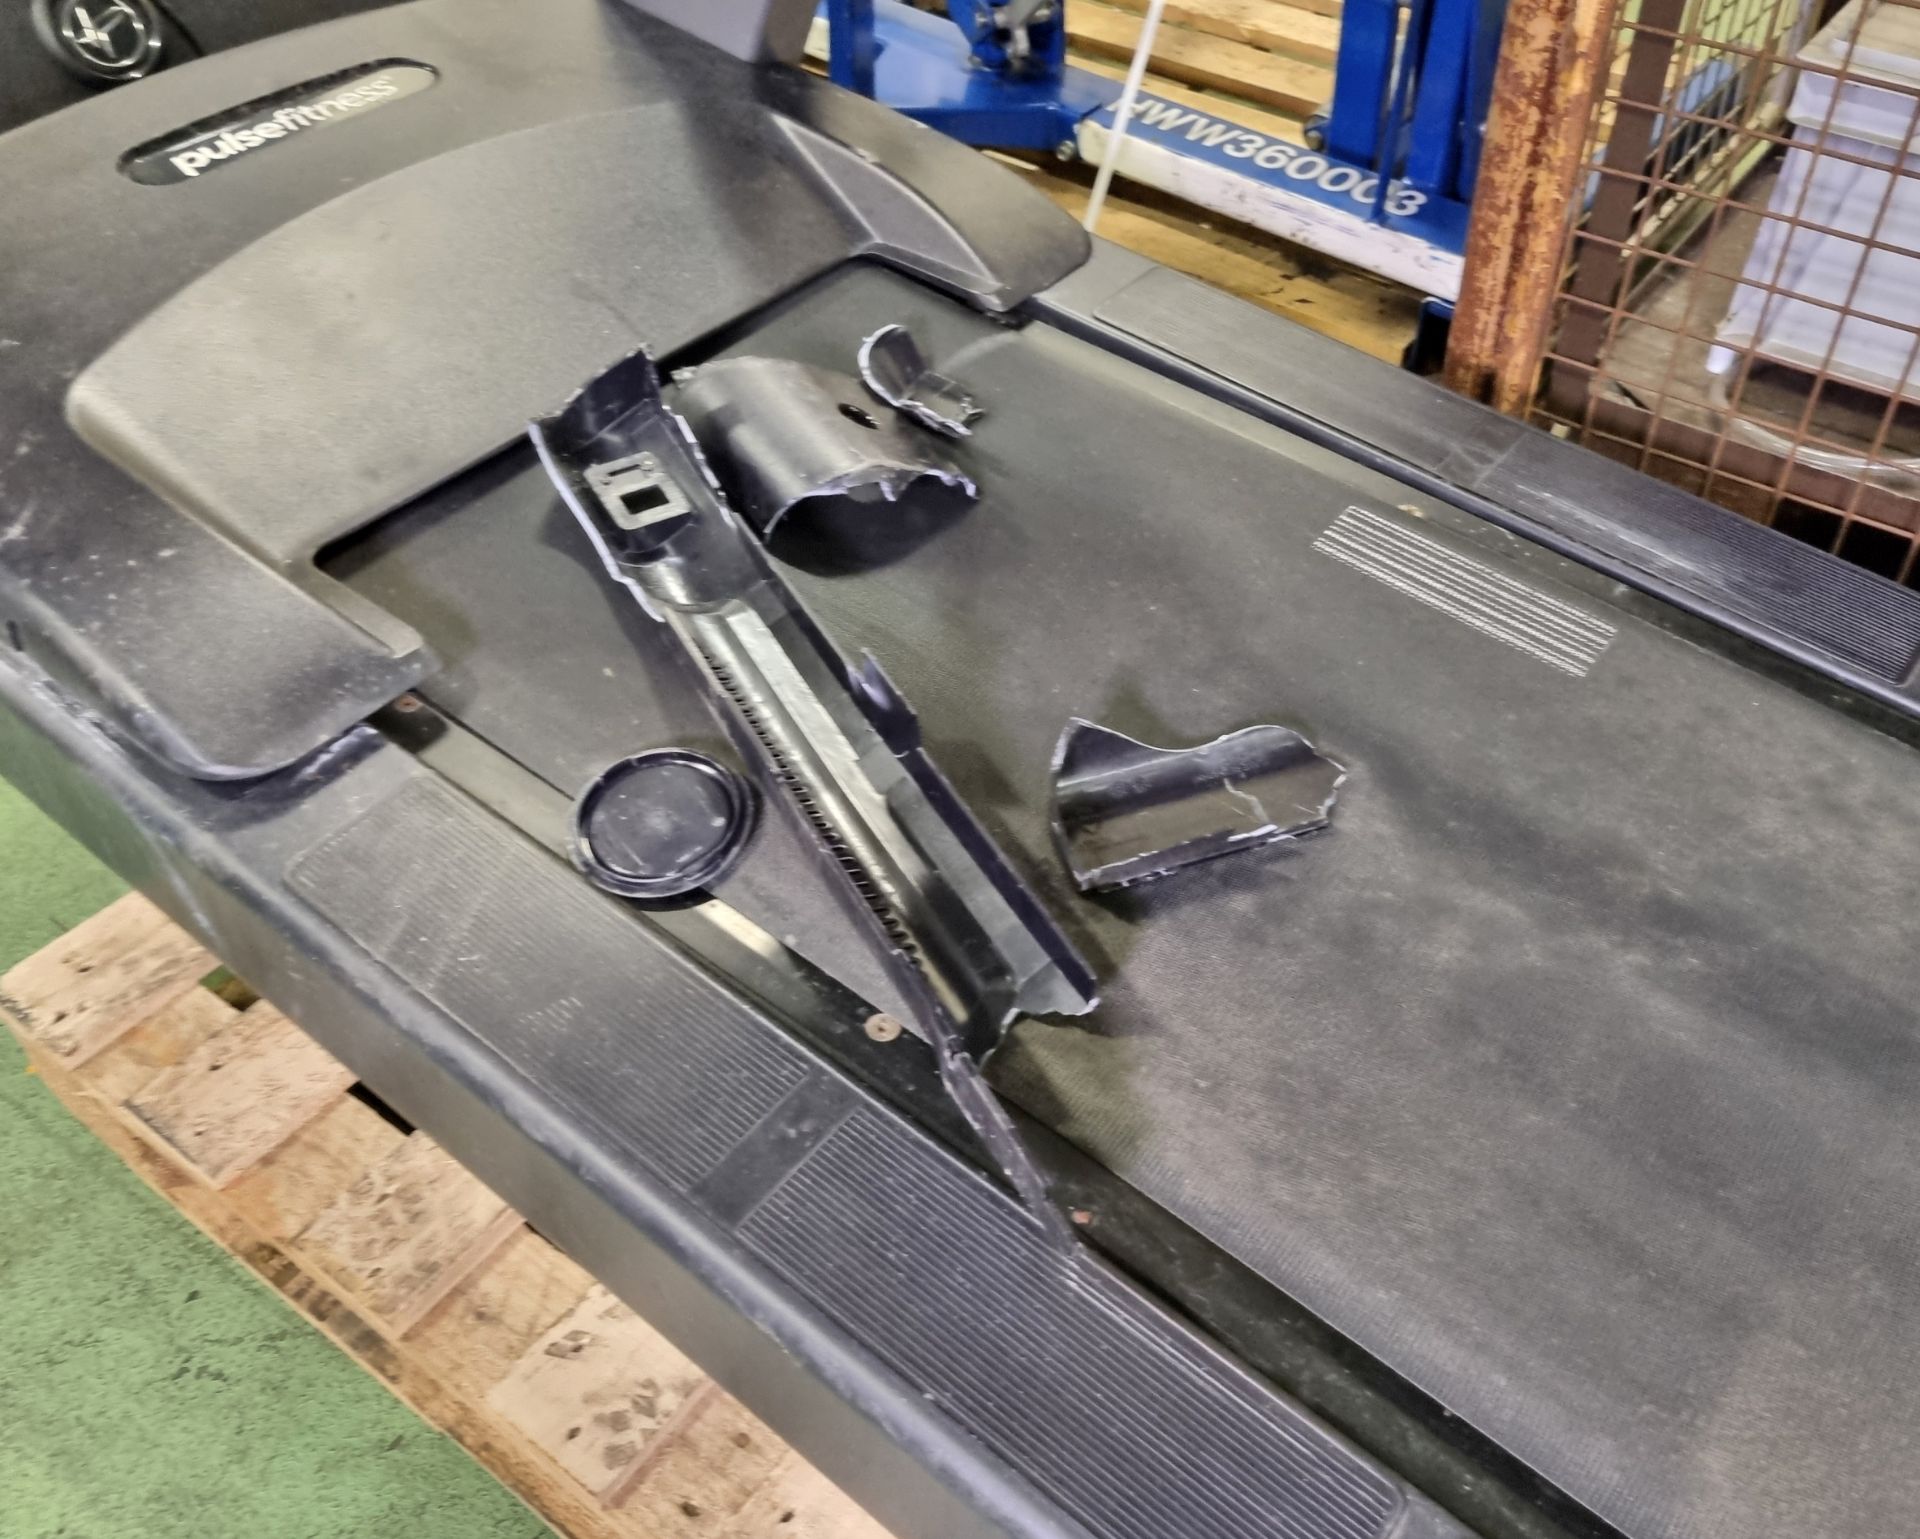 Pulse Fitness 260G treadmill - damage to front - W 2120 x D 850 x H 1580 mm - Image 5 of 7